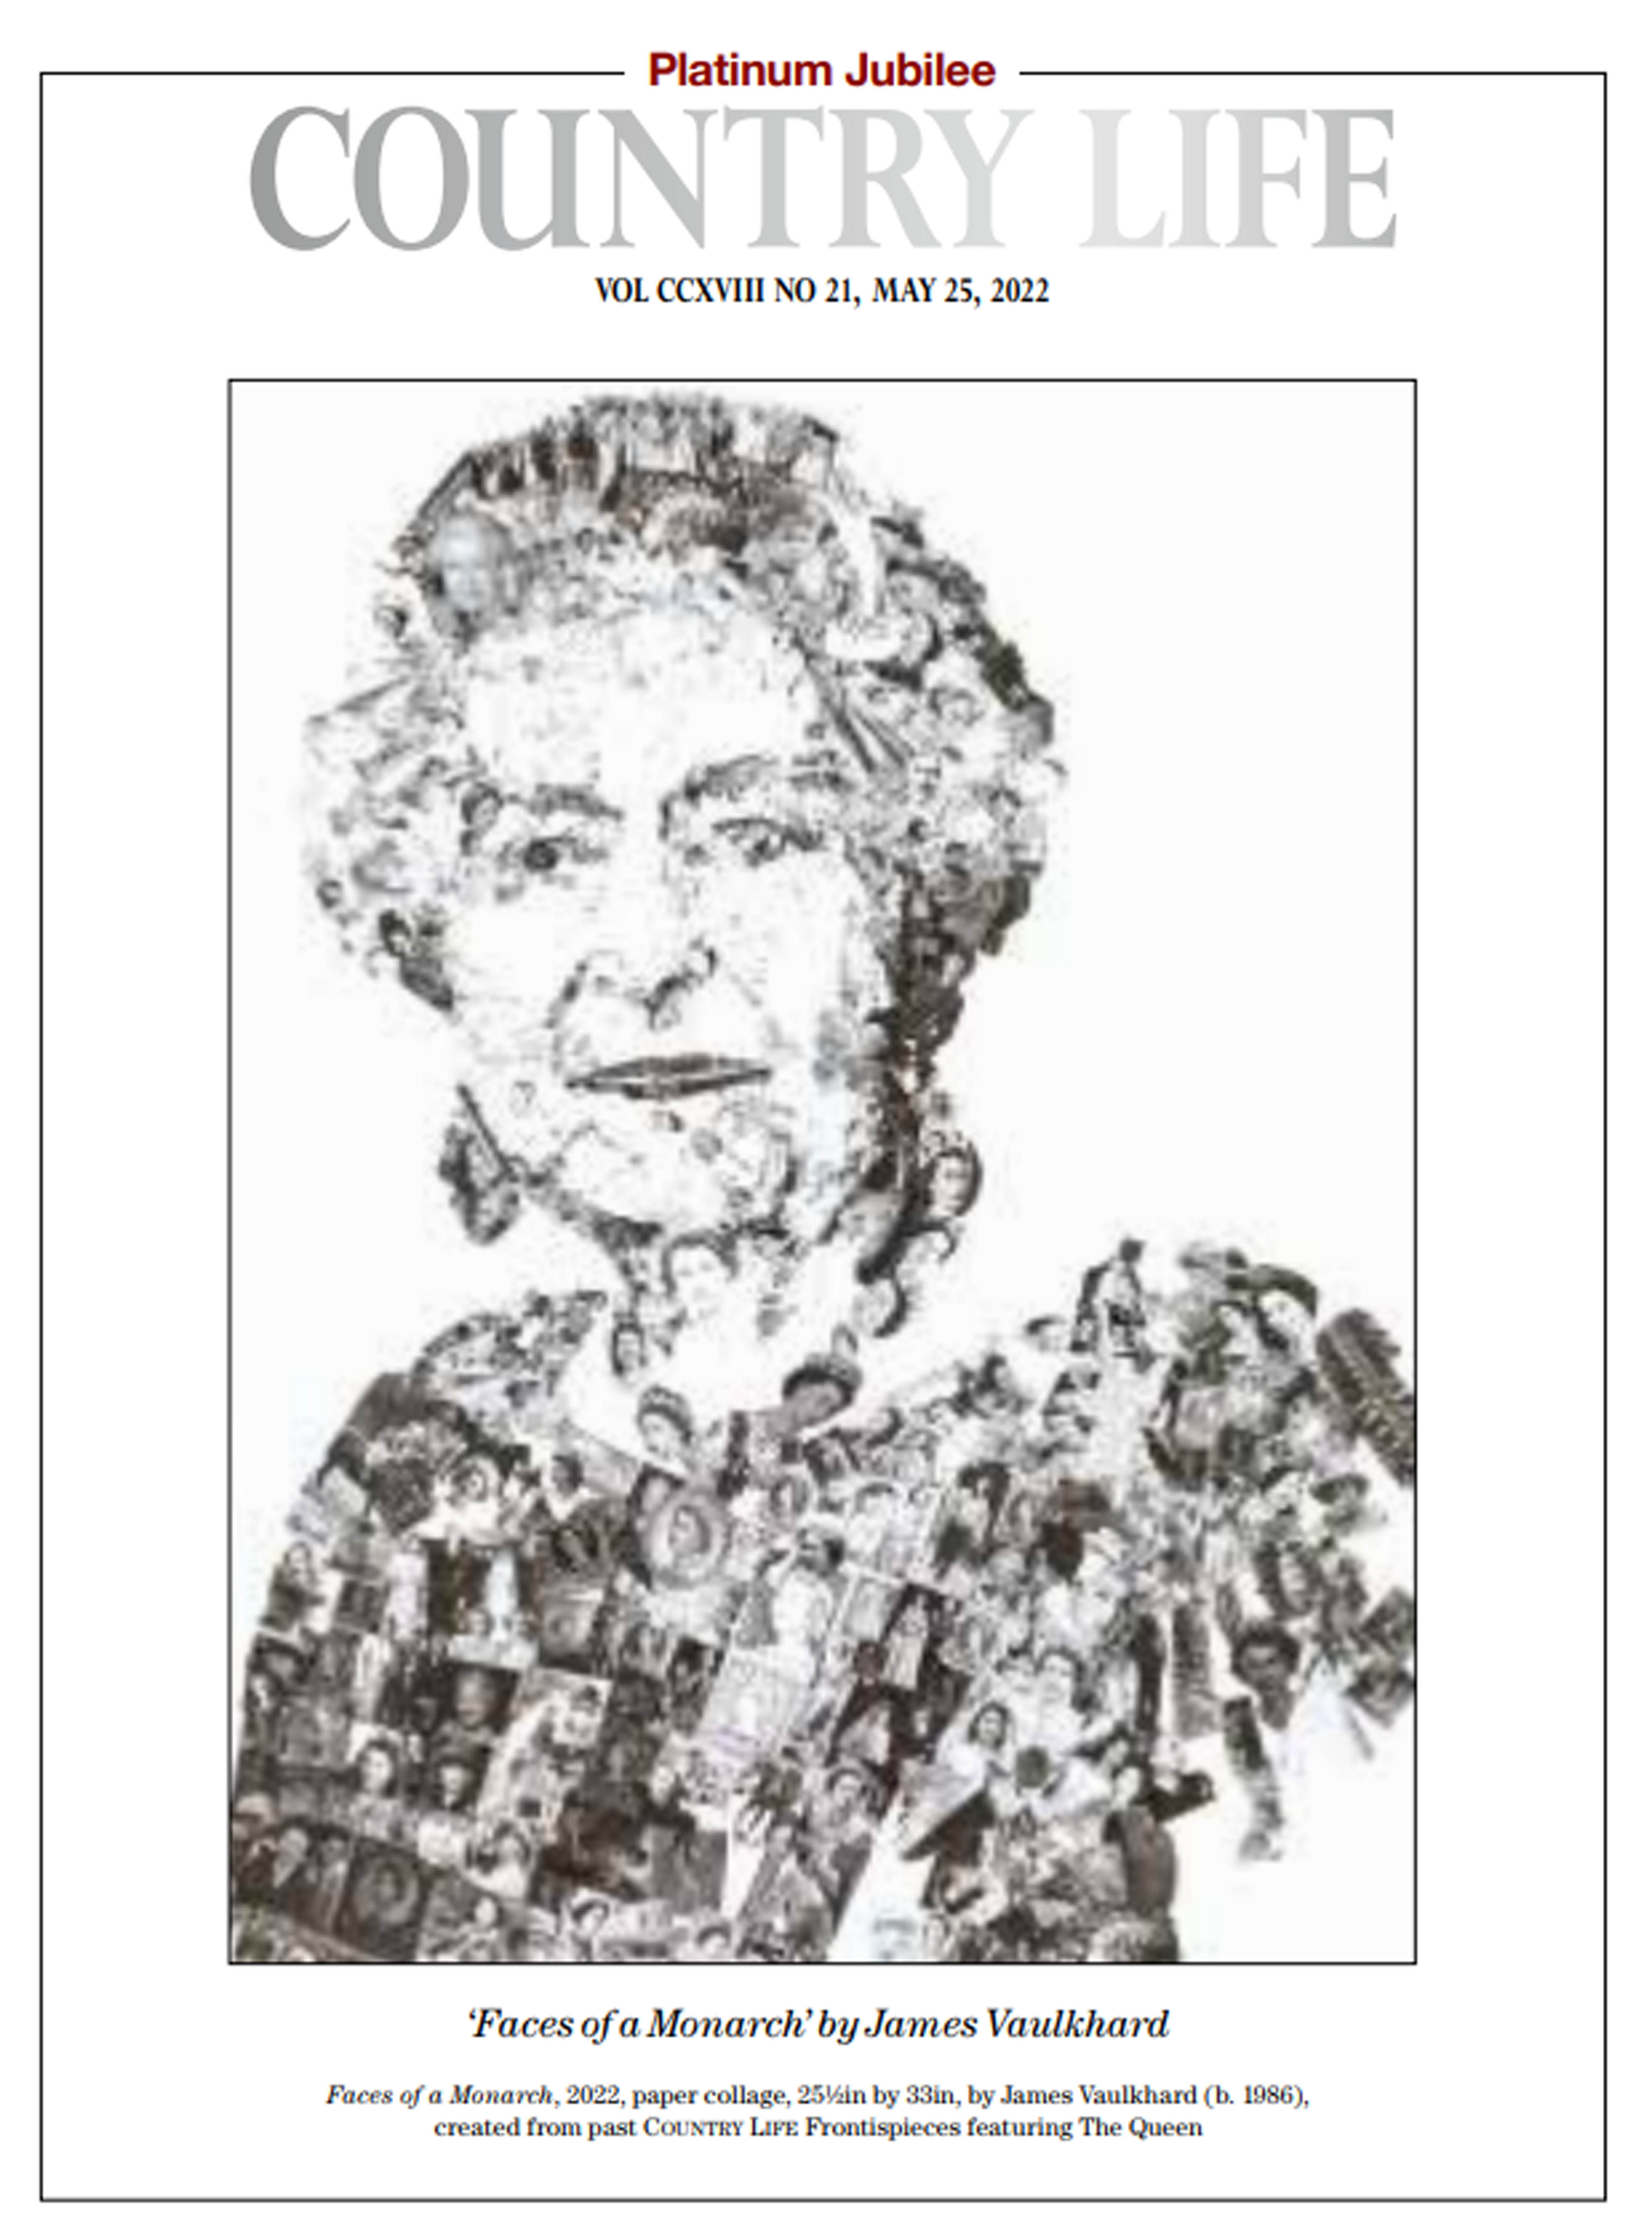 The frontispiece of the Queen in the Platinum Jubilee edition of Country Life